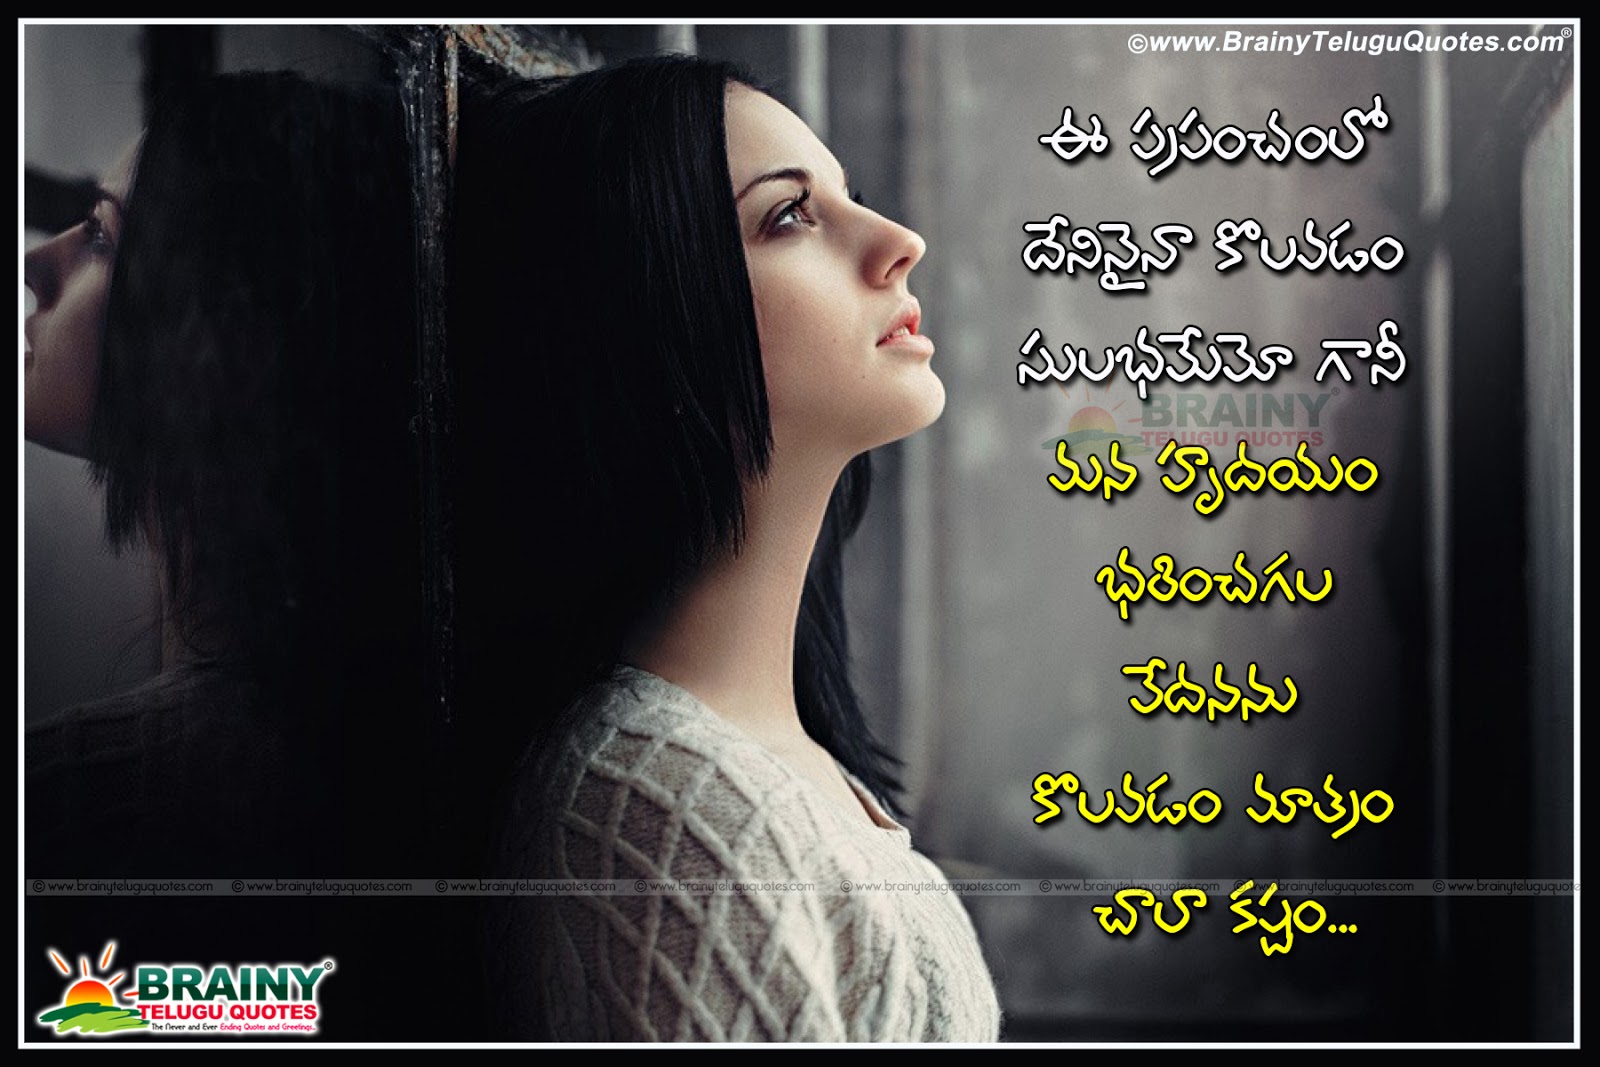 Here is a Sad Lovers Quotations and Best Love Failure Girls Quotes line Love Failure Inspiring Quotations in Telugu language Telugu